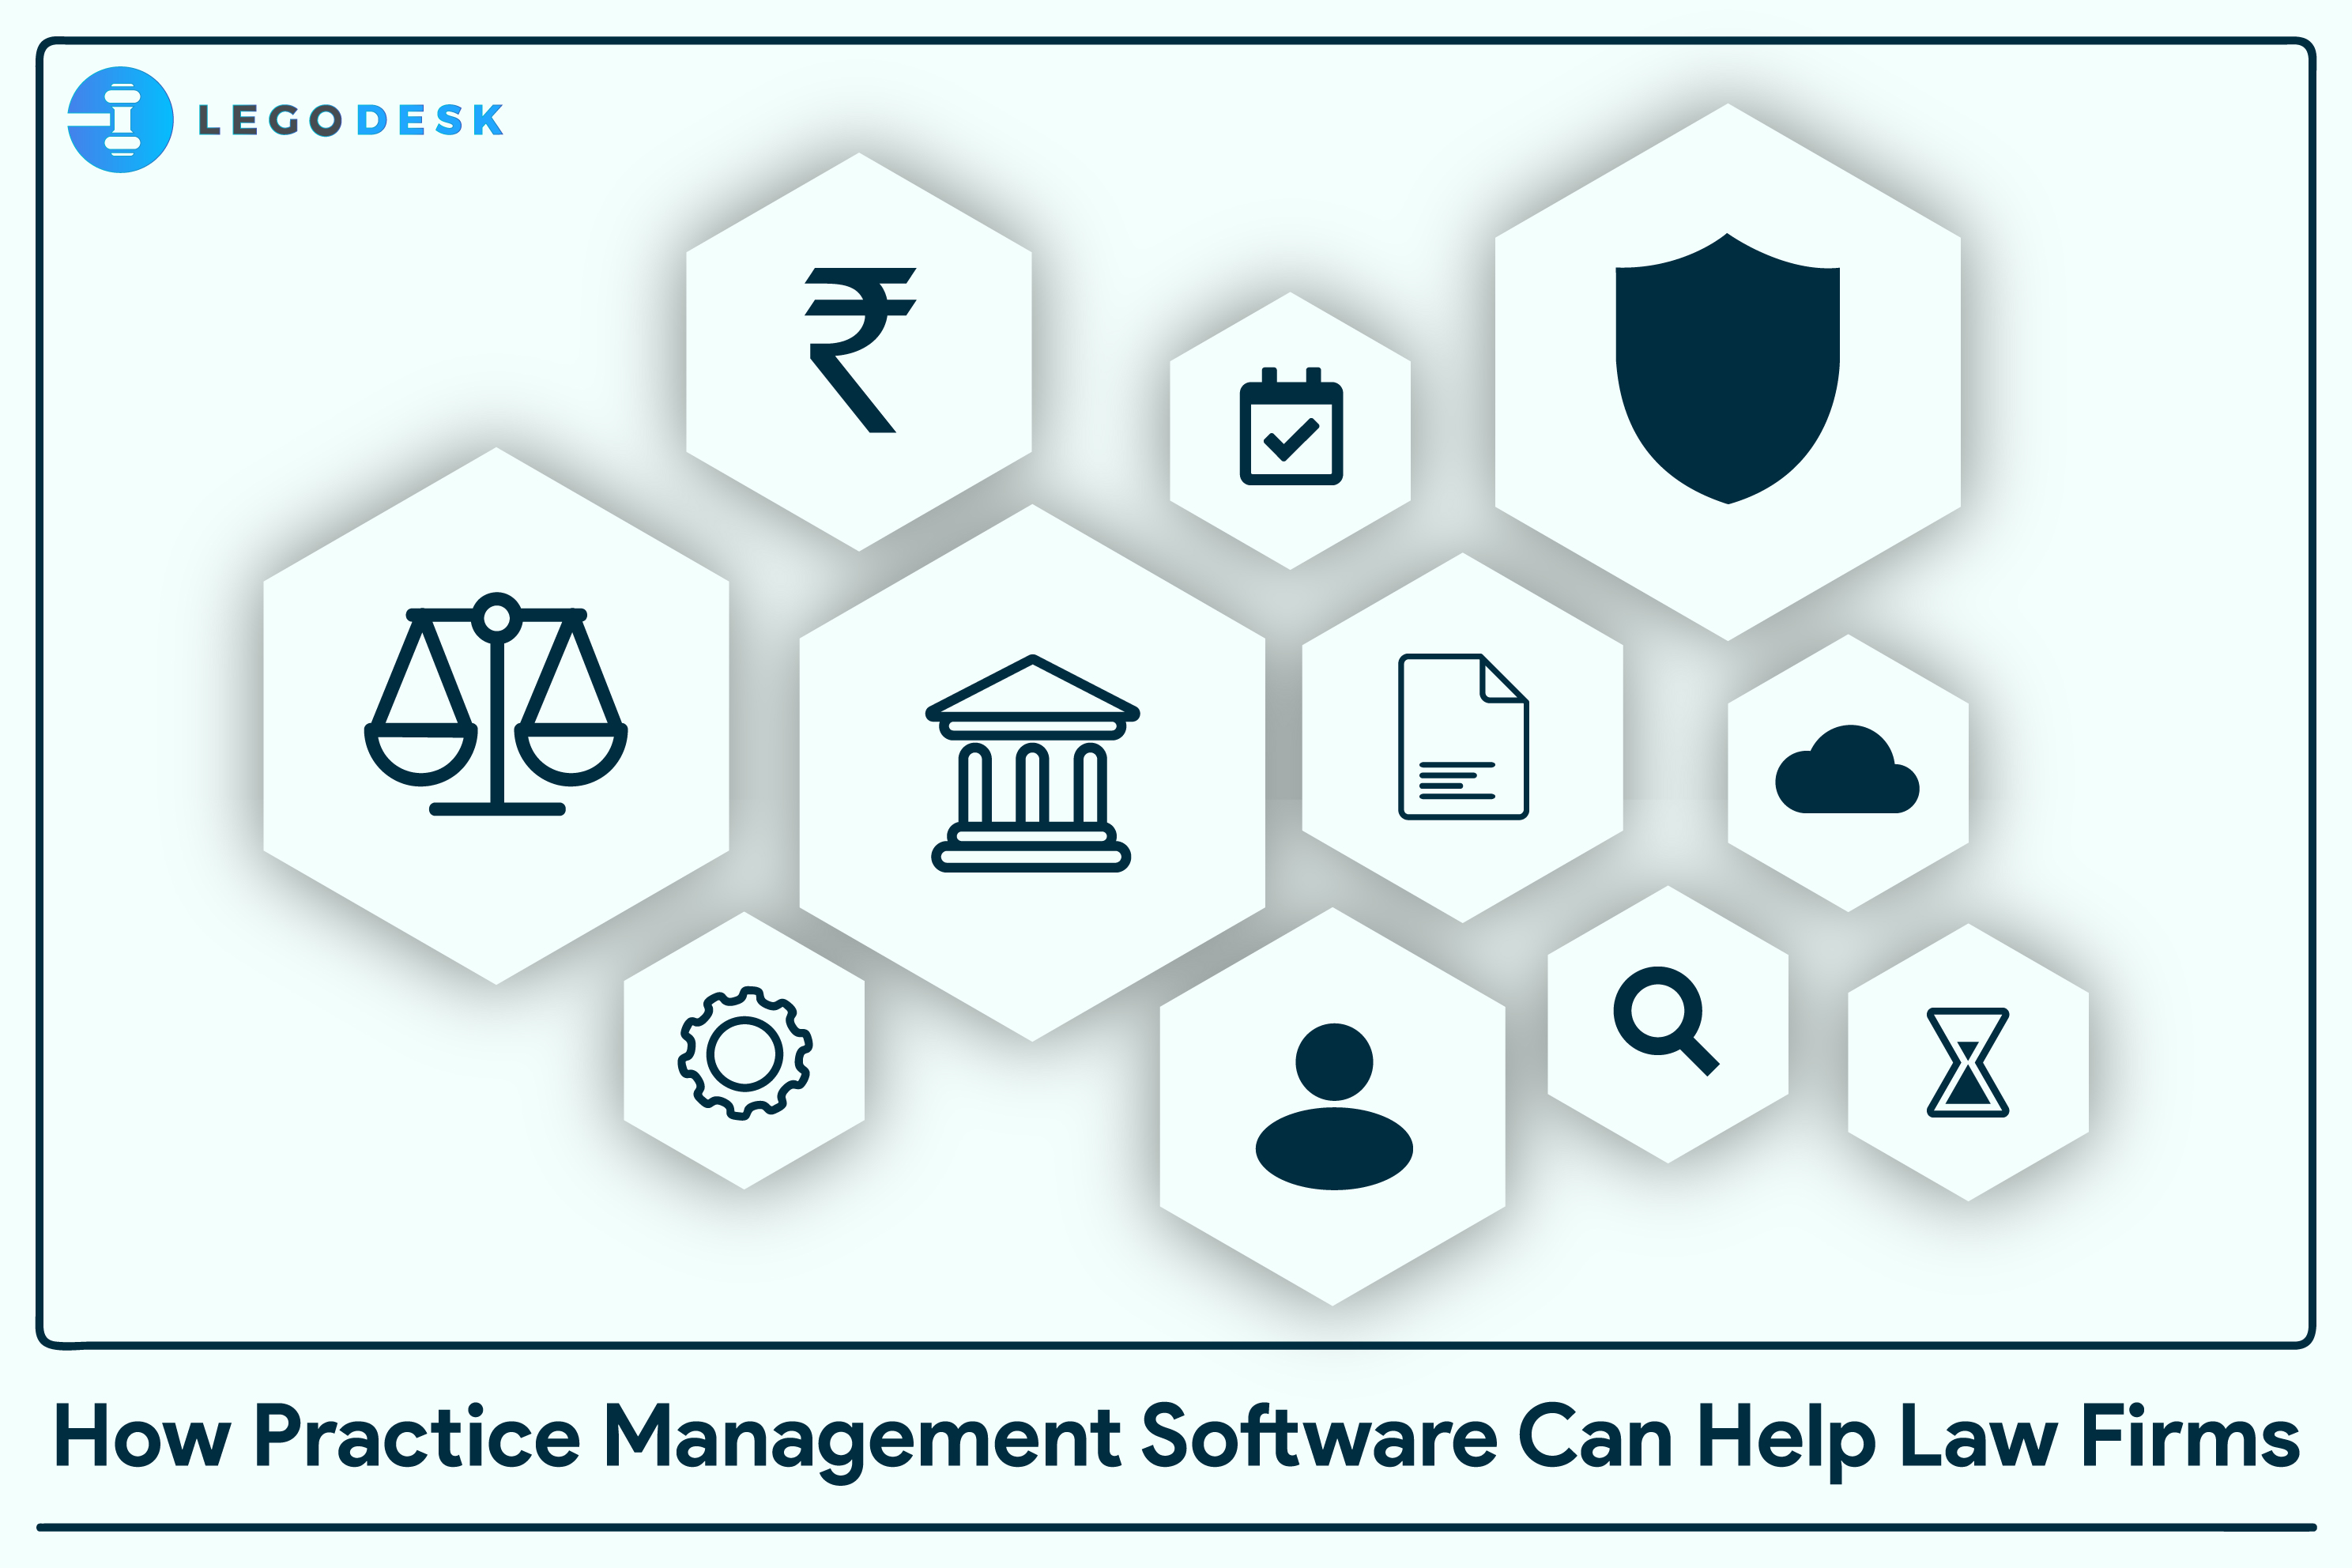 Law firm practice management software for lawyers